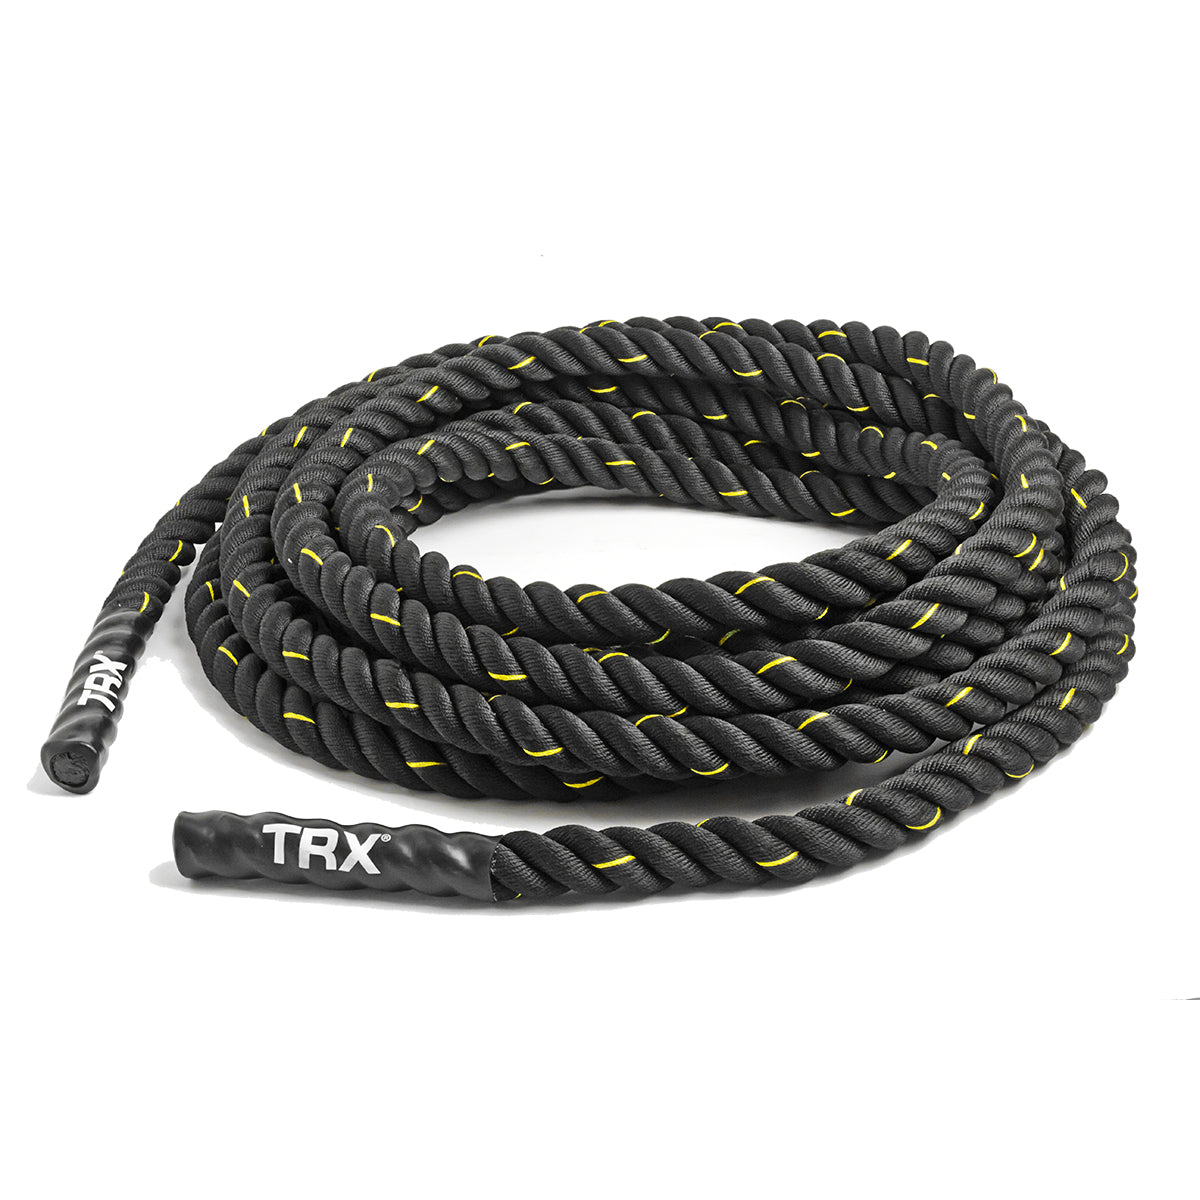 Get Your Sweat On with TRX Battle Ropes